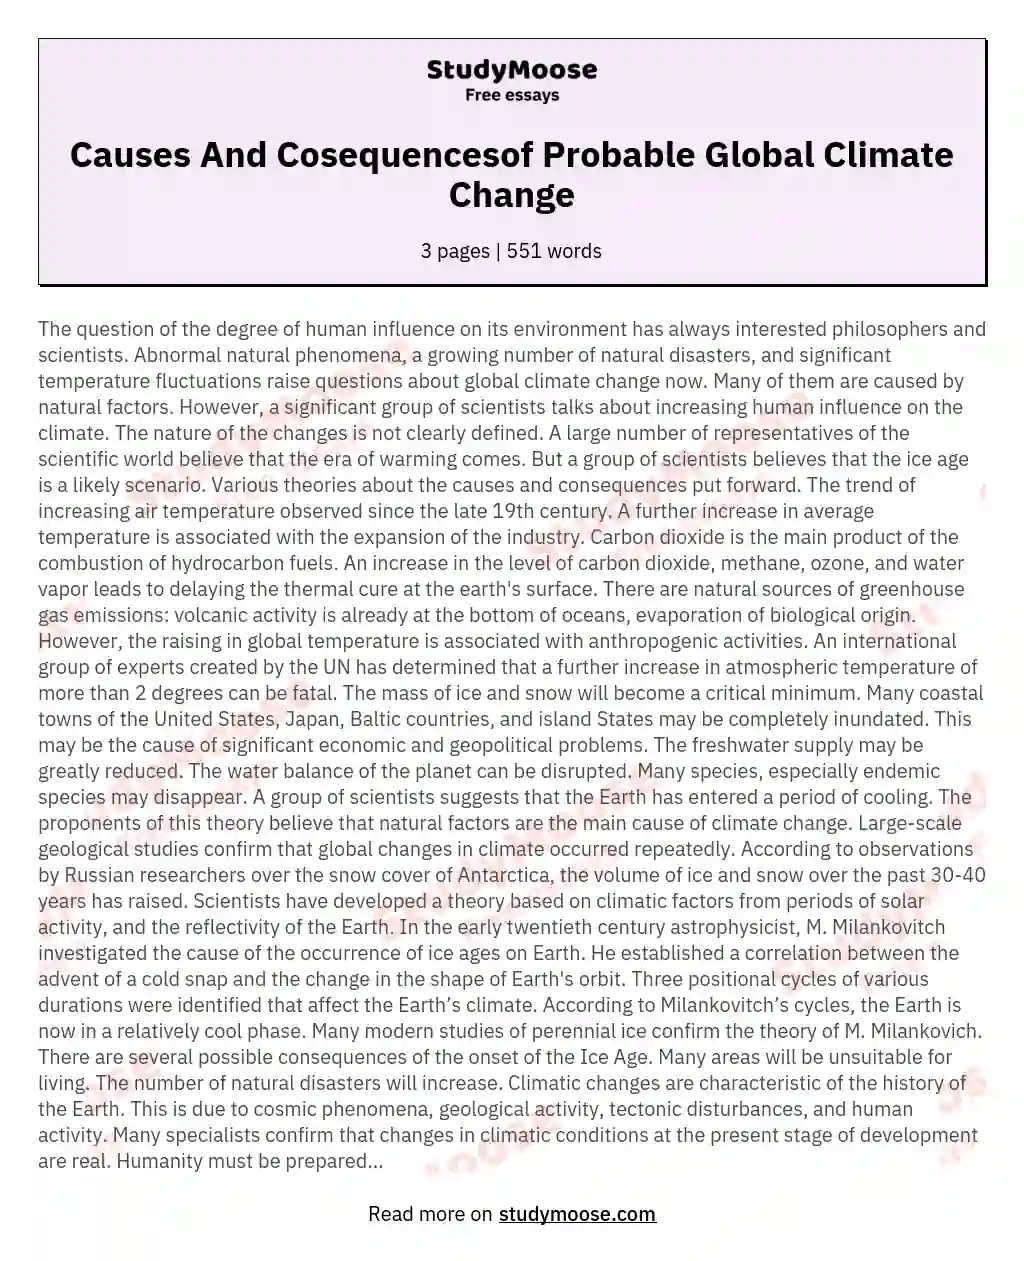 Causes And Cosequencesof Probable Global Climate Change essay